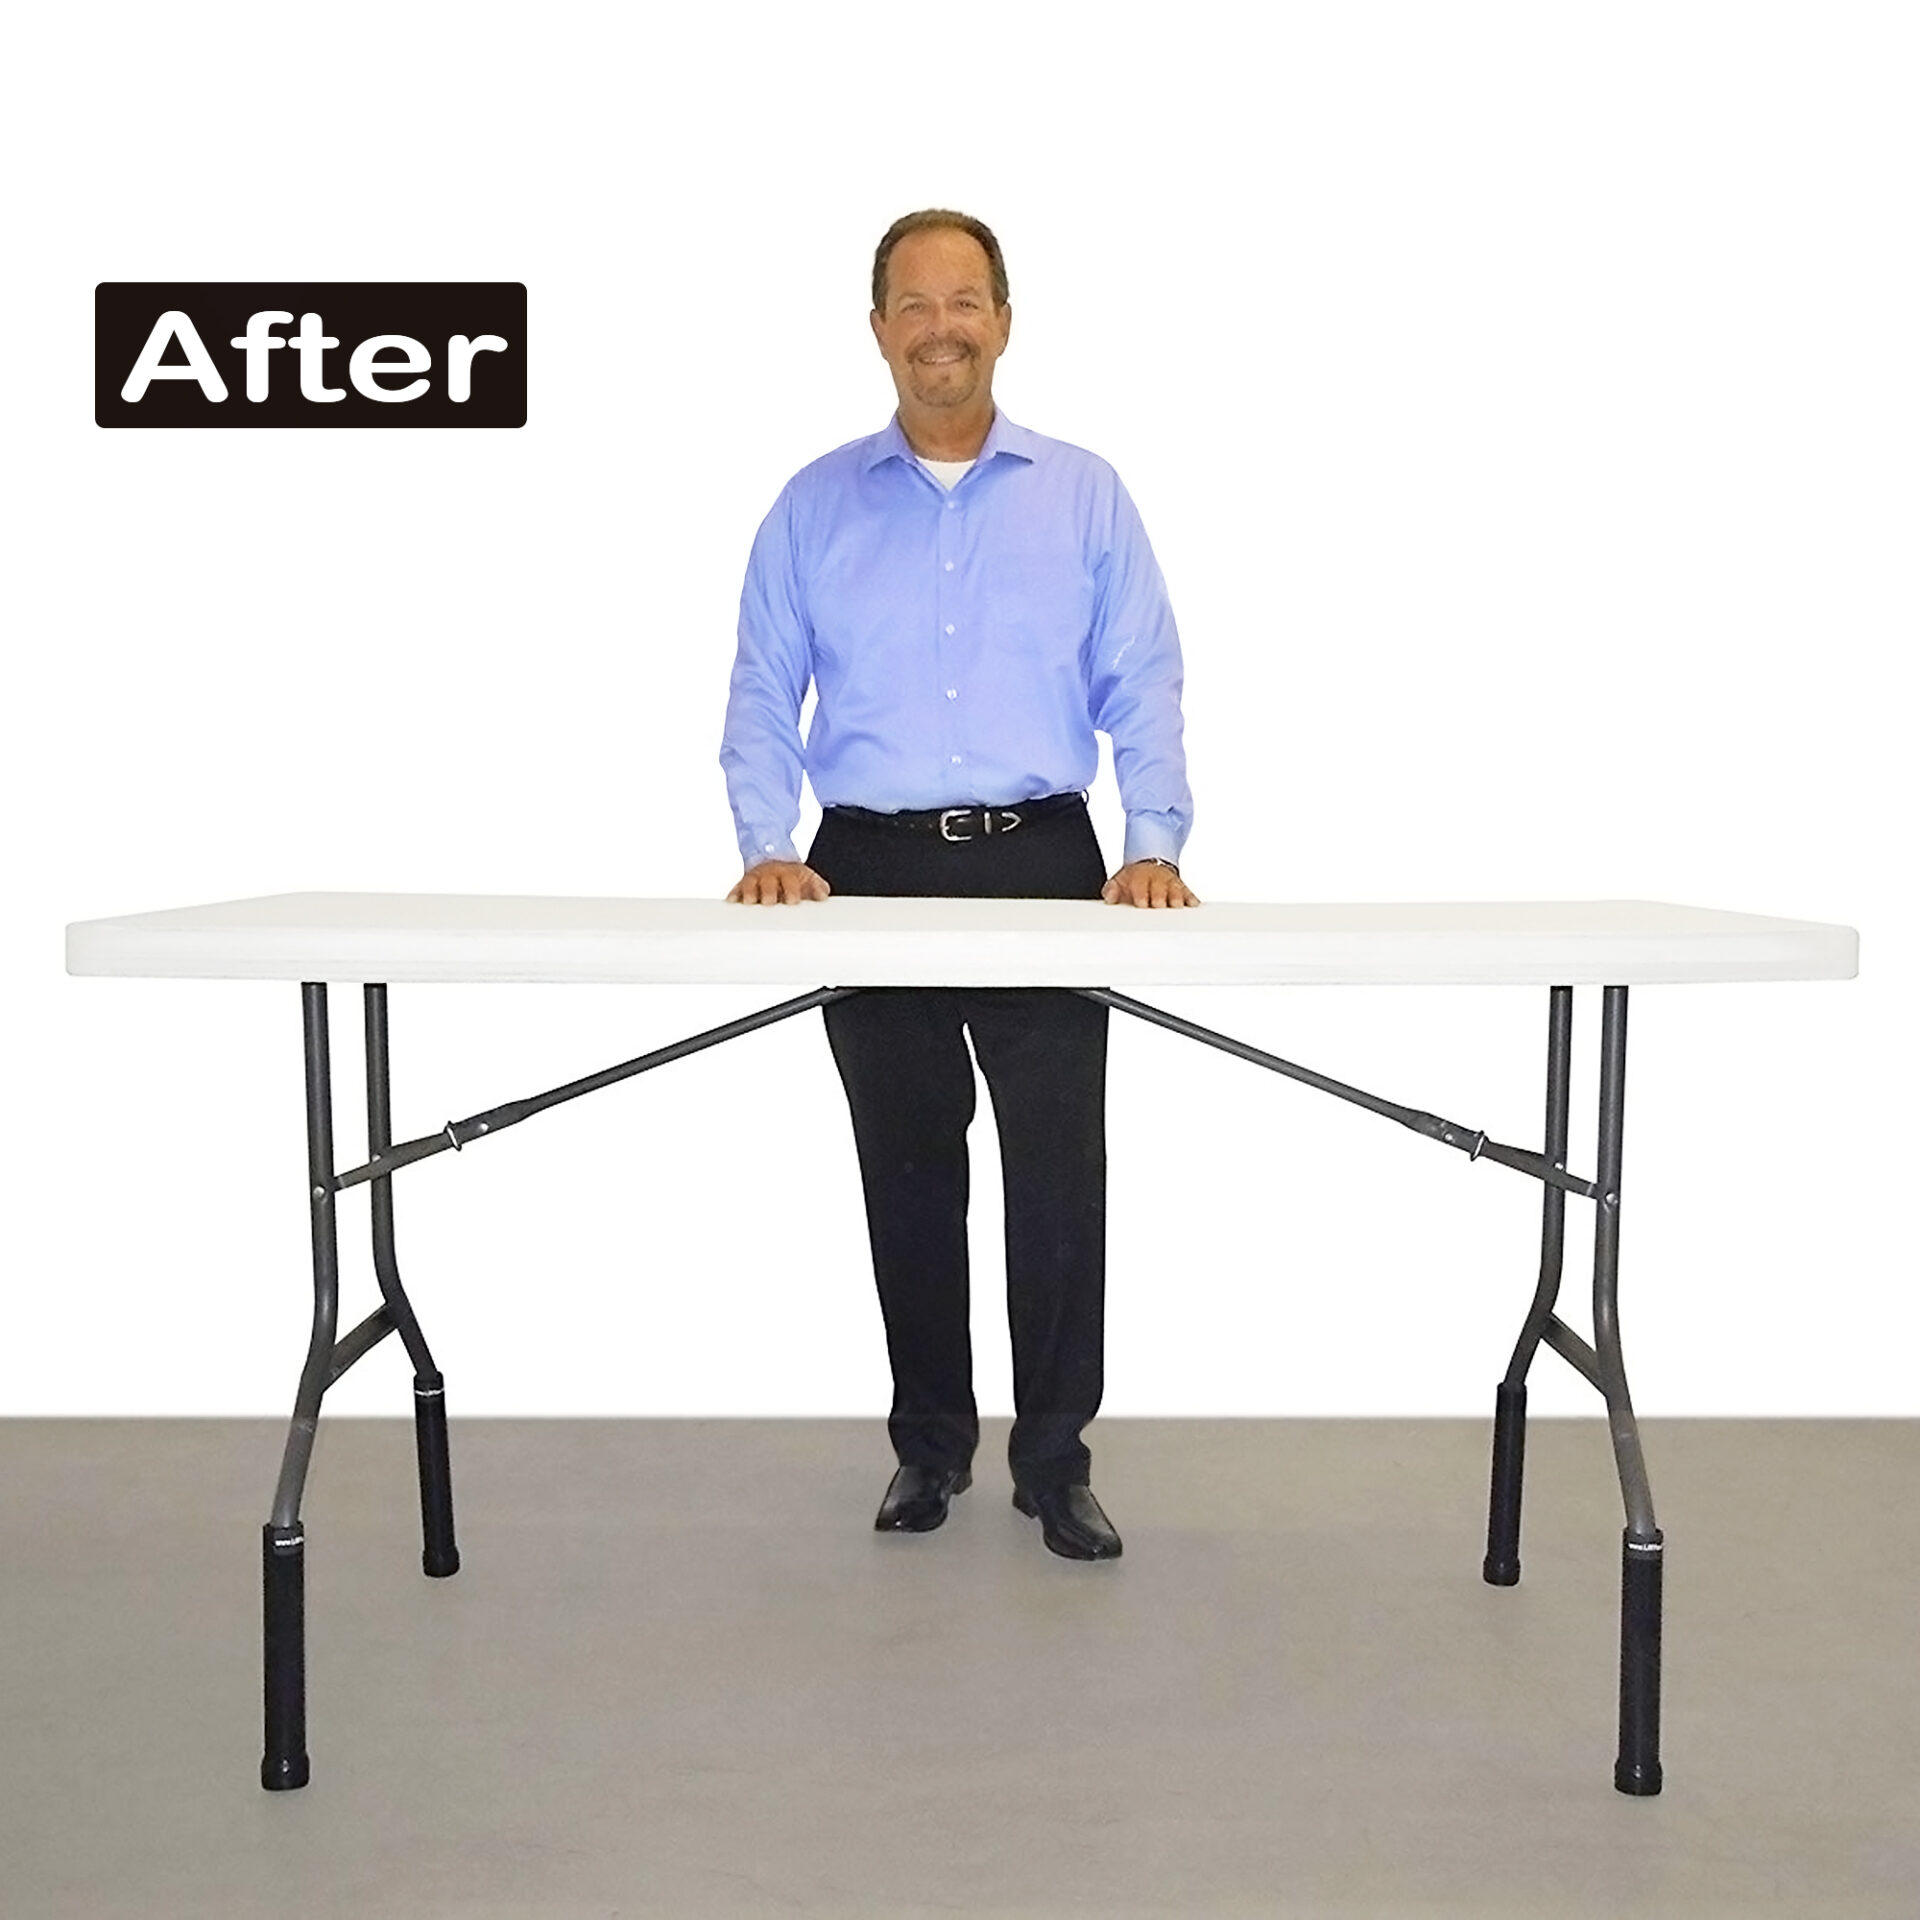 Lift Your Table Leg Extensions Standing Desk Kit Raises Desk Height Up to 42 Non Slip Foot for Use with Wishbone/Bent Leg Folding Tables